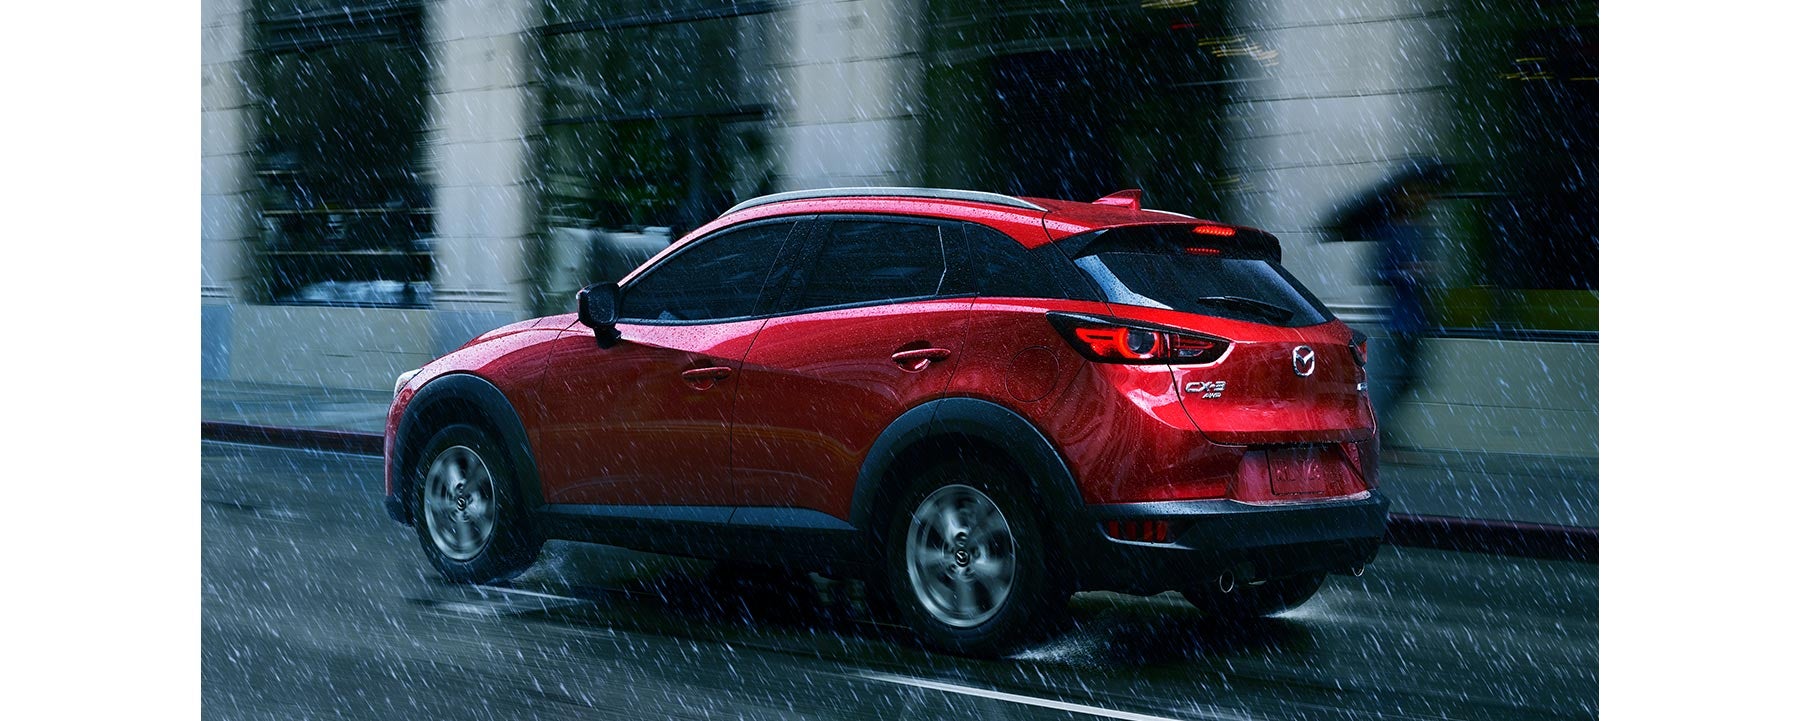 Mazda CX-3 with accessories and 2020 rear badging